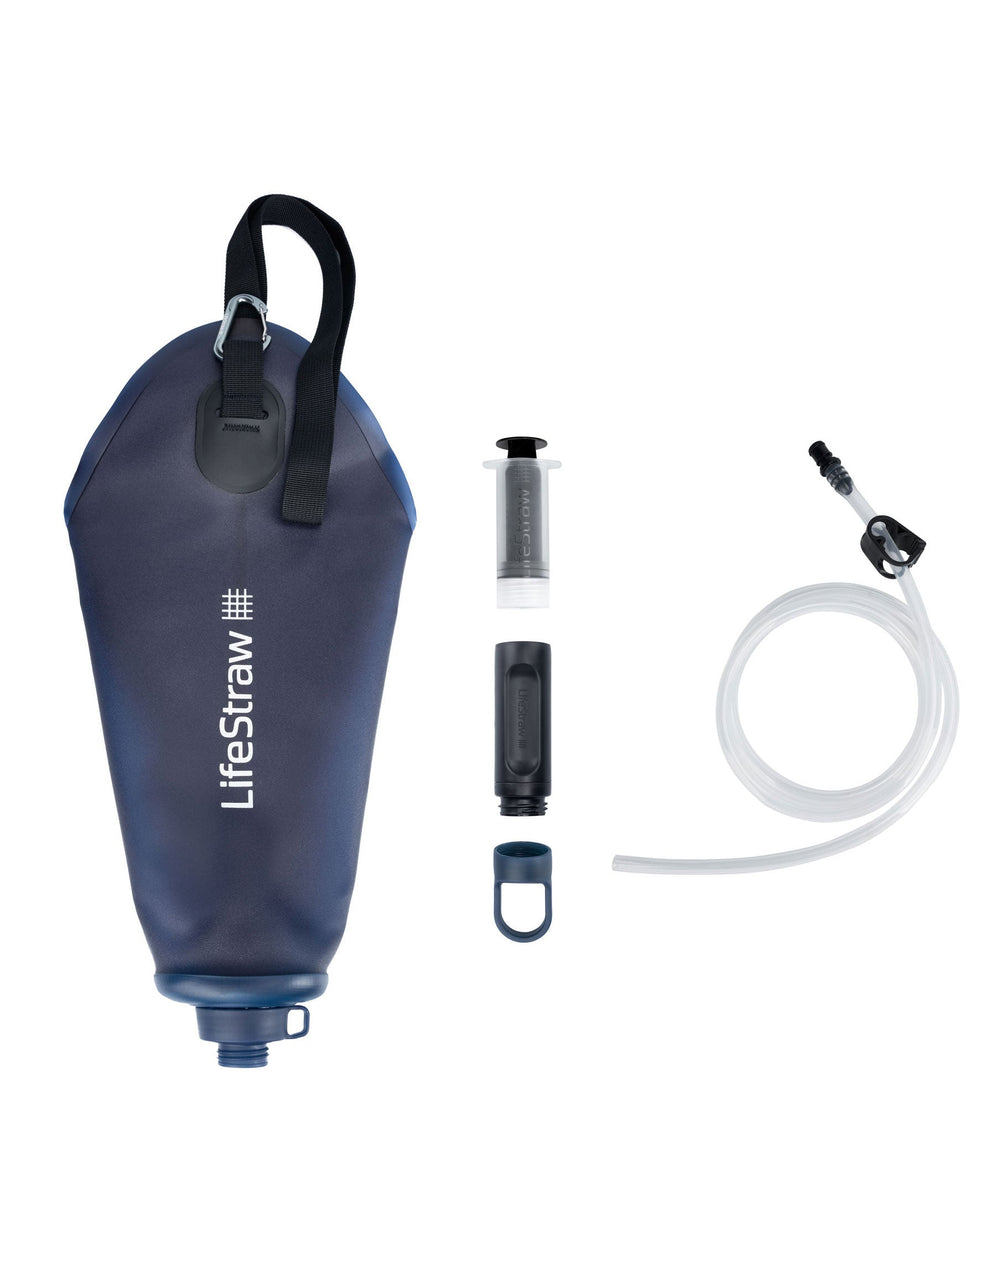 LifeStraw Peak Series Gravity Filter and Squeeze Filter Full